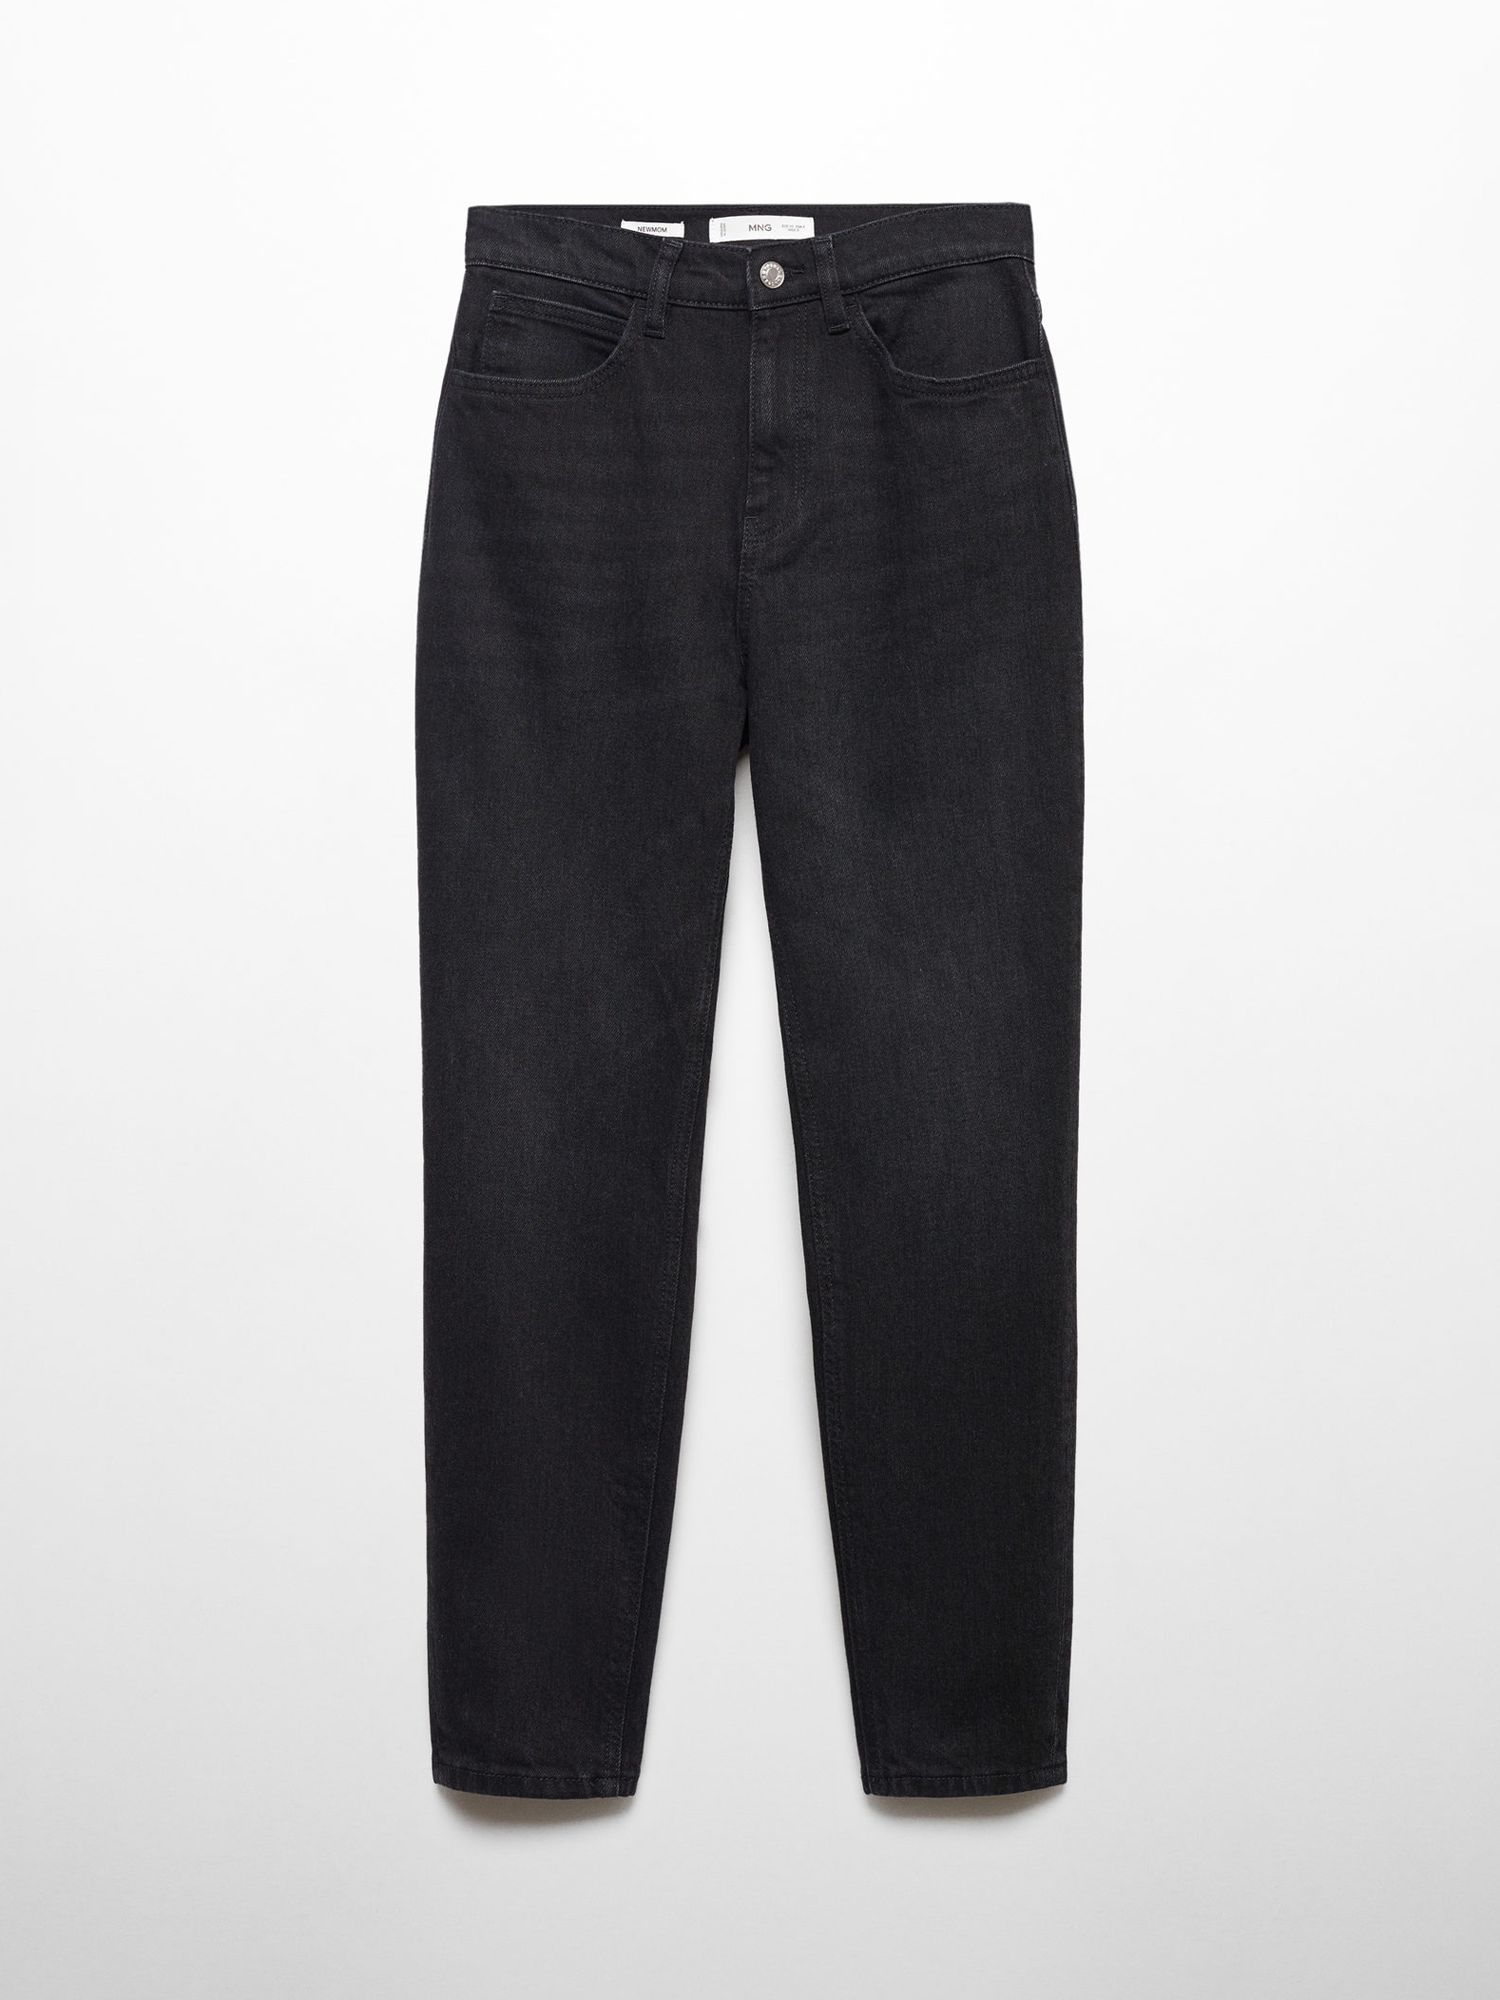 Buy Mango New Mom Cropped Jeans, Open Grey Online at johnlewis.com